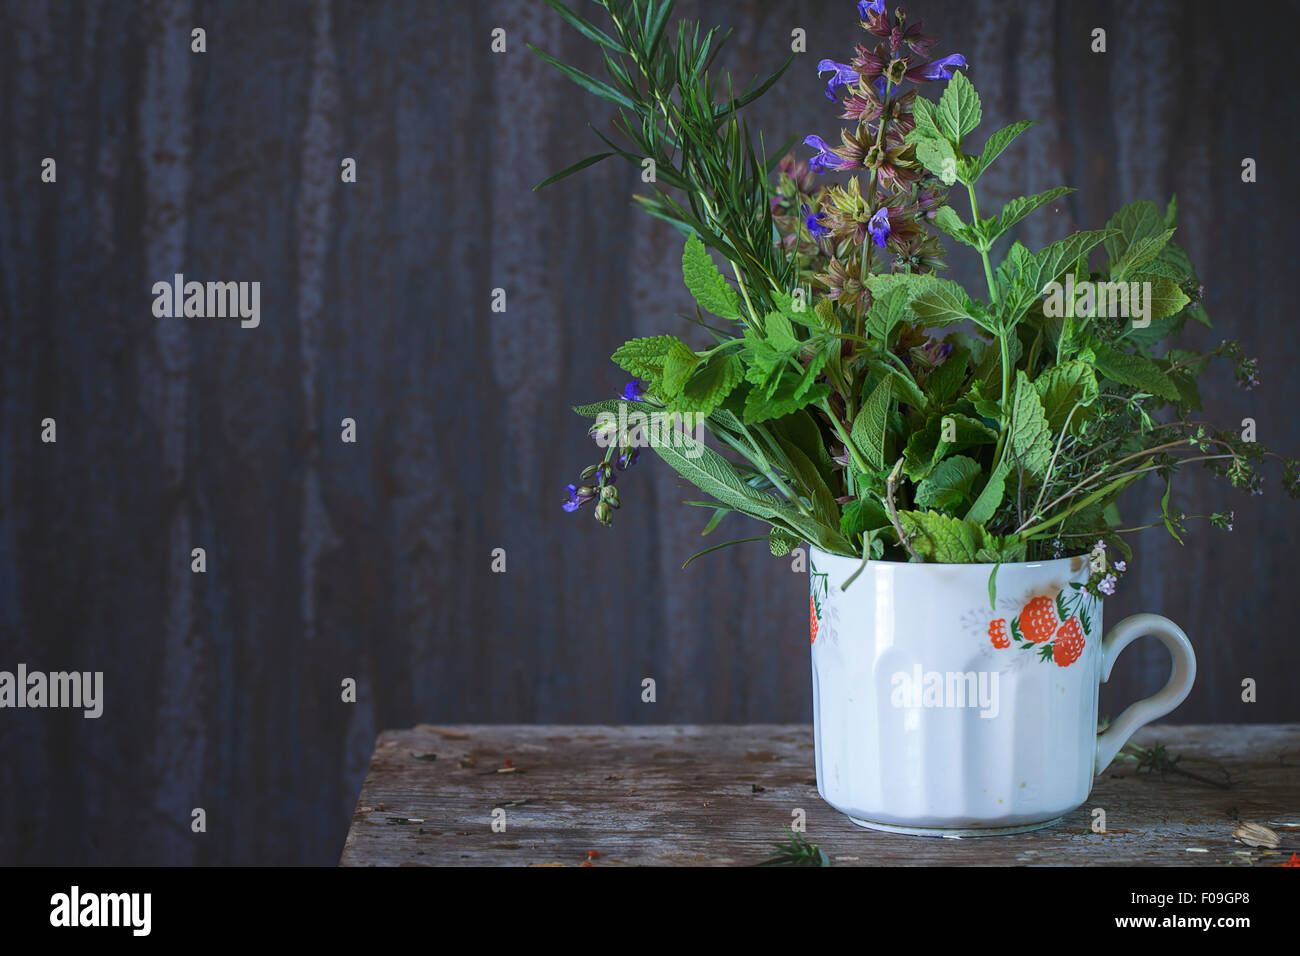 Old cup with assortment of fresh herbs mint, oregano, thym, blooming sage over old wooden background. Natural day light. Stock Photo